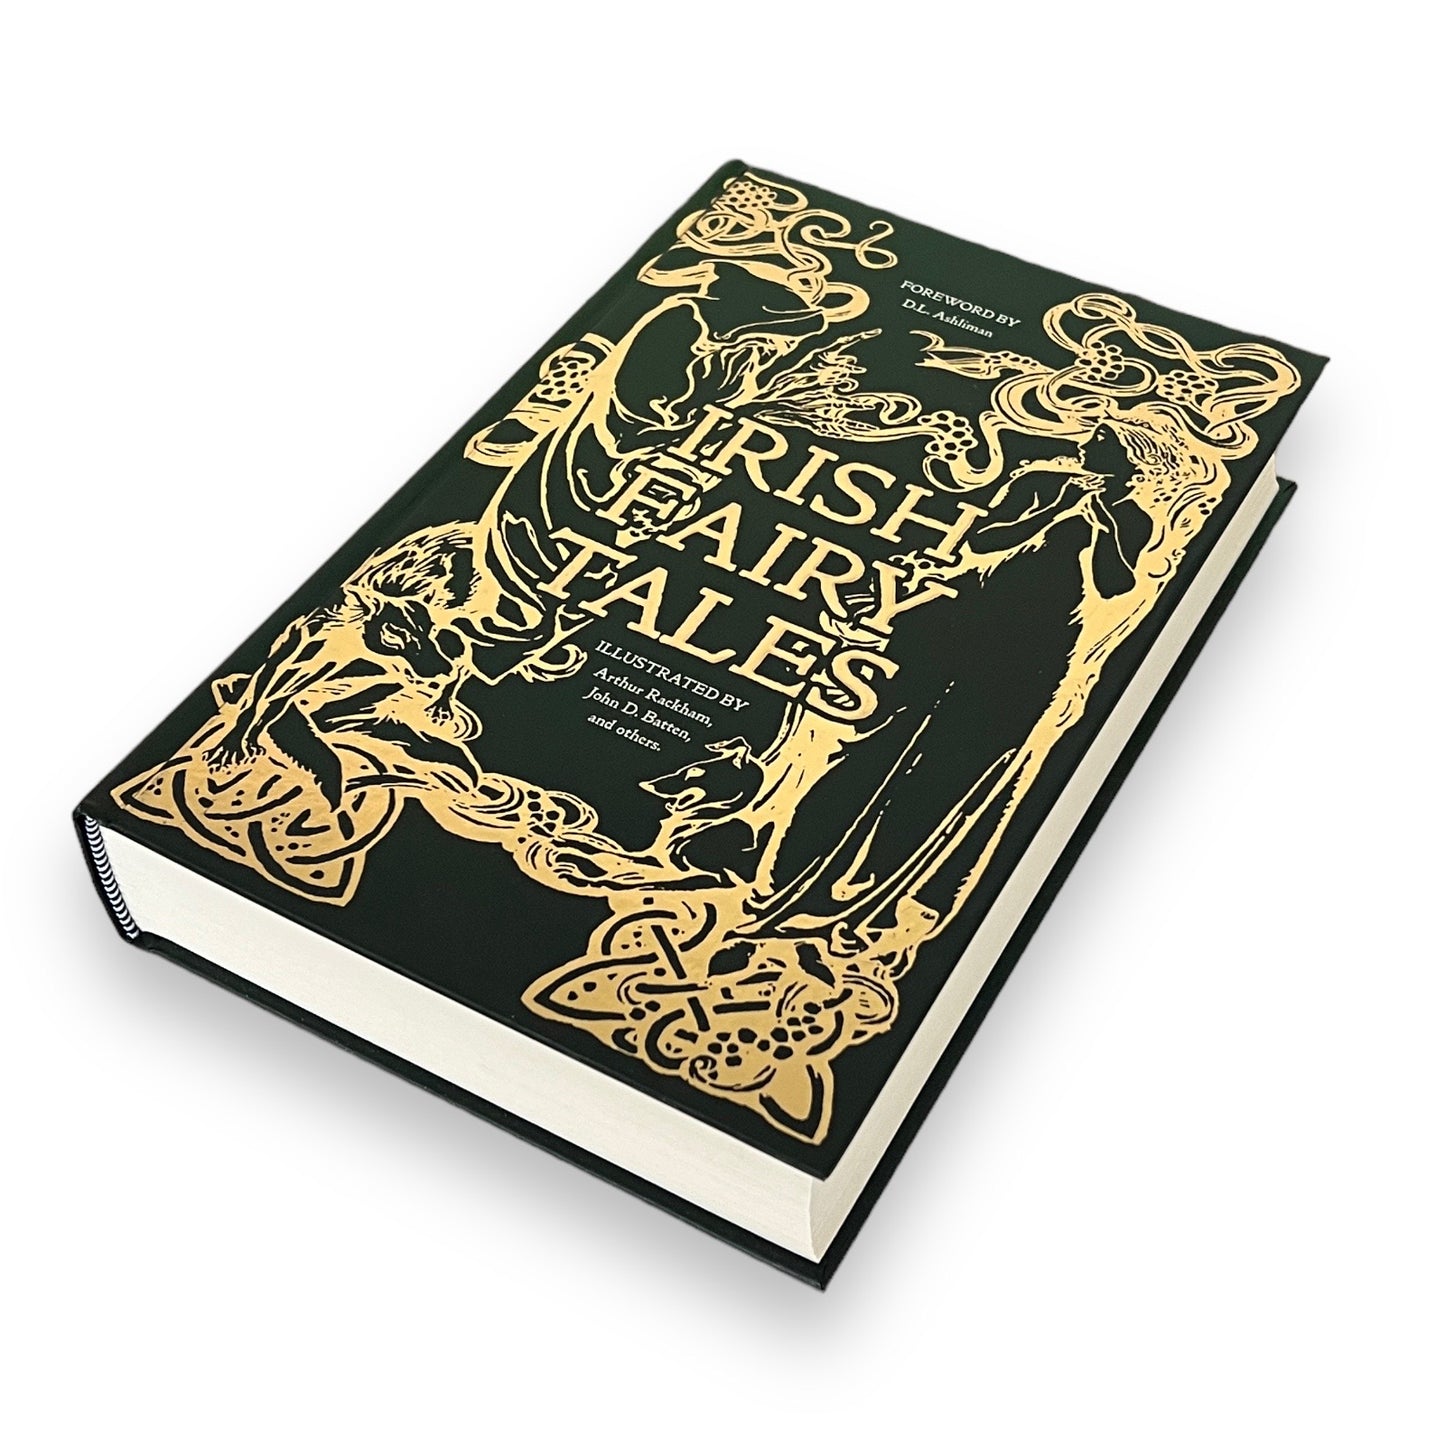 IRISH Fairy Tales Illustrated by Arthur Rackham - Collectible Deluxe Special Gift Edition - Hardcover - Best Seller - Classic Book